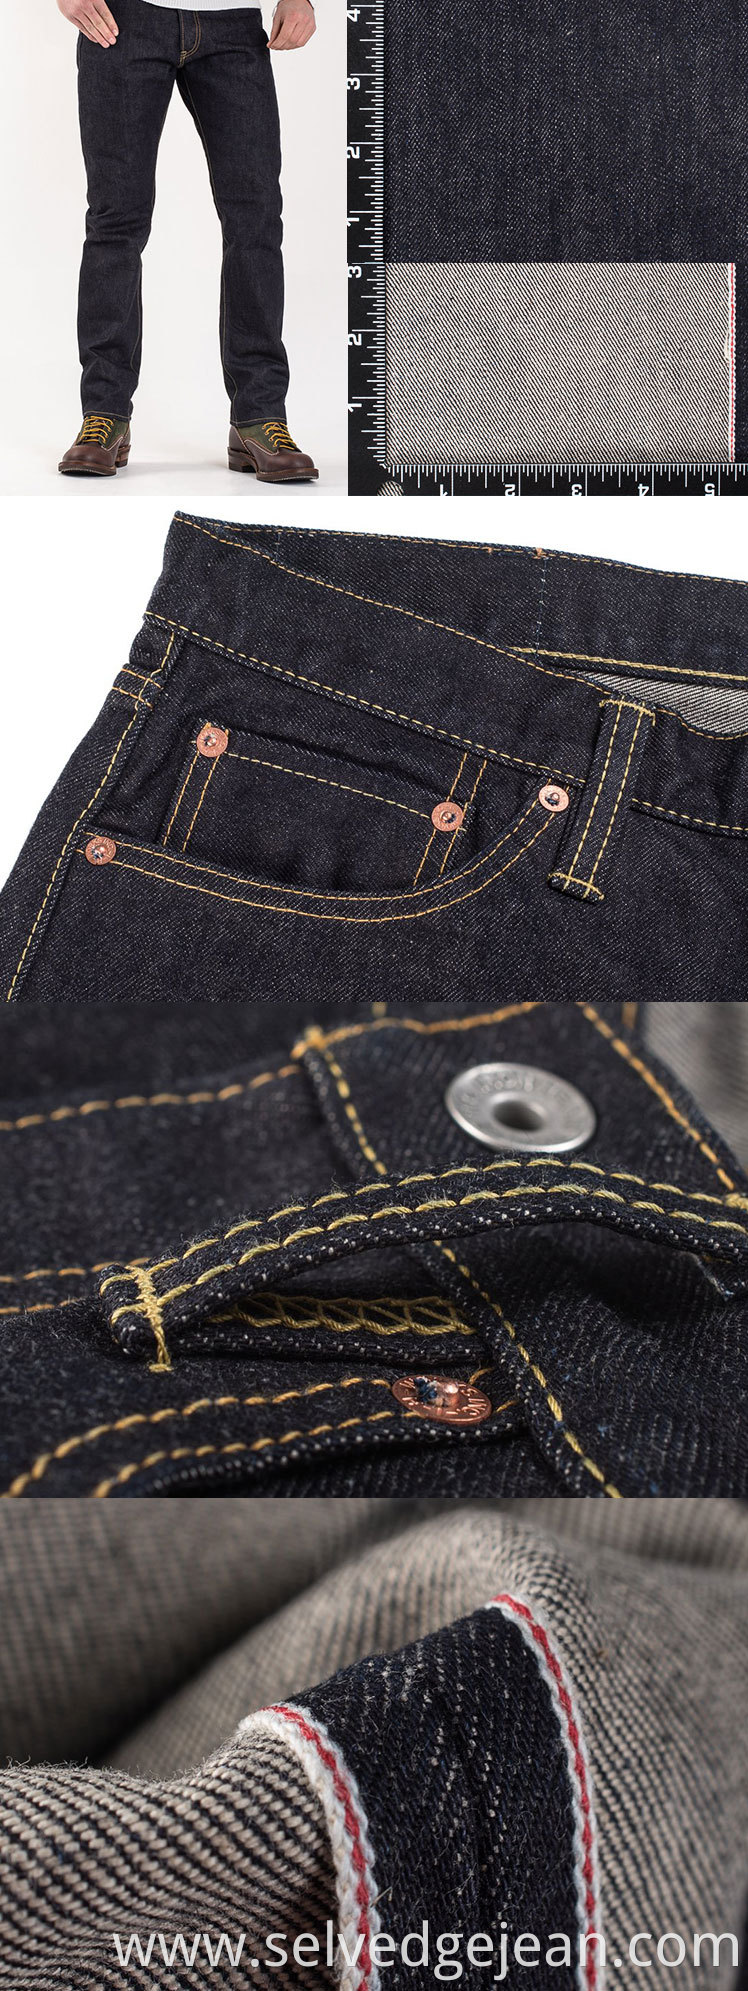 17oz deep indigo tapered cut and color fade jeggings raw kain selvedge man denim fabric jeans